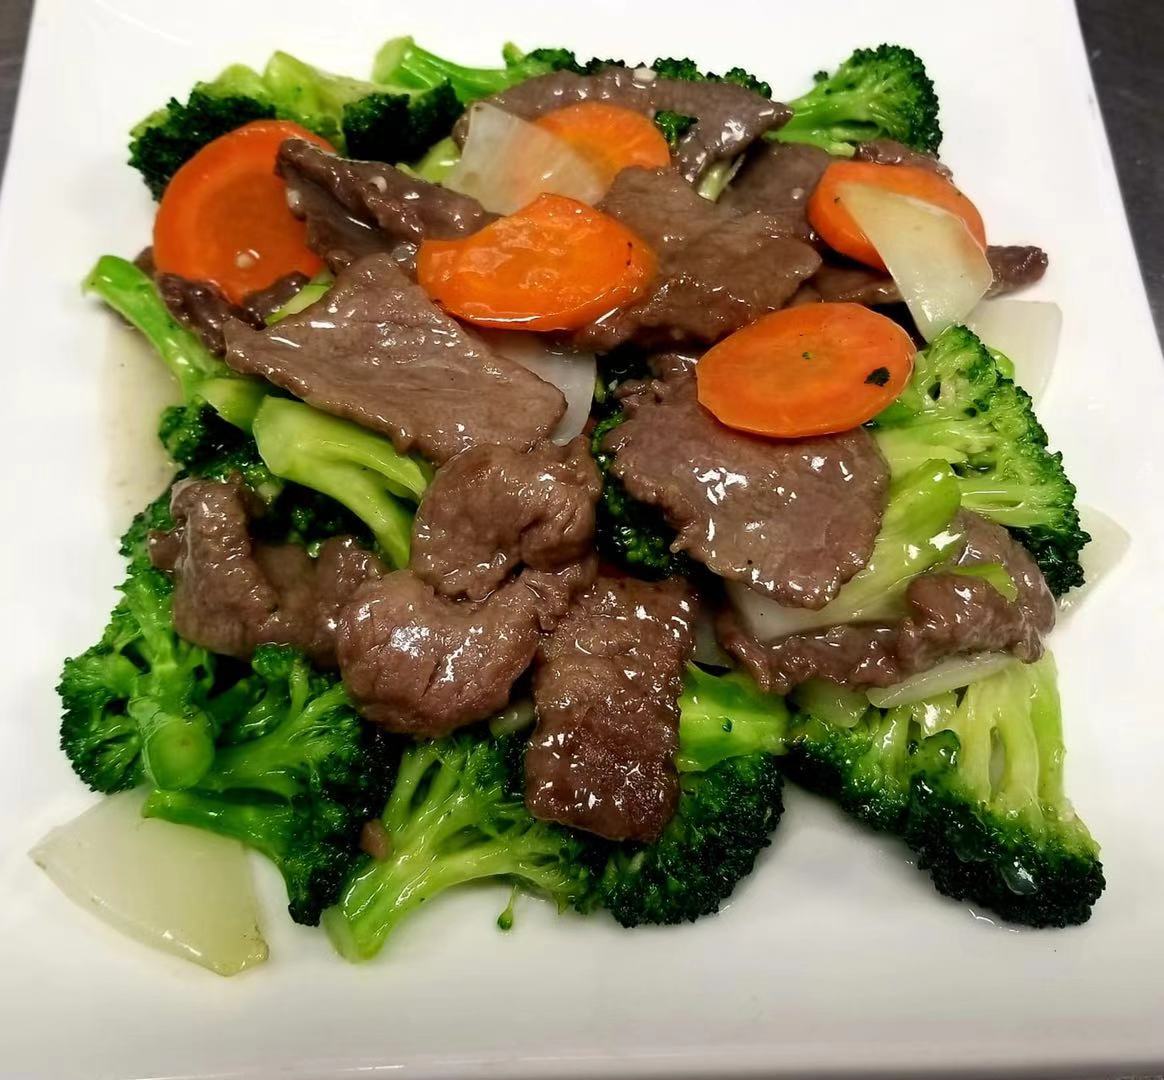 169. Sliced Beef with Broccoli